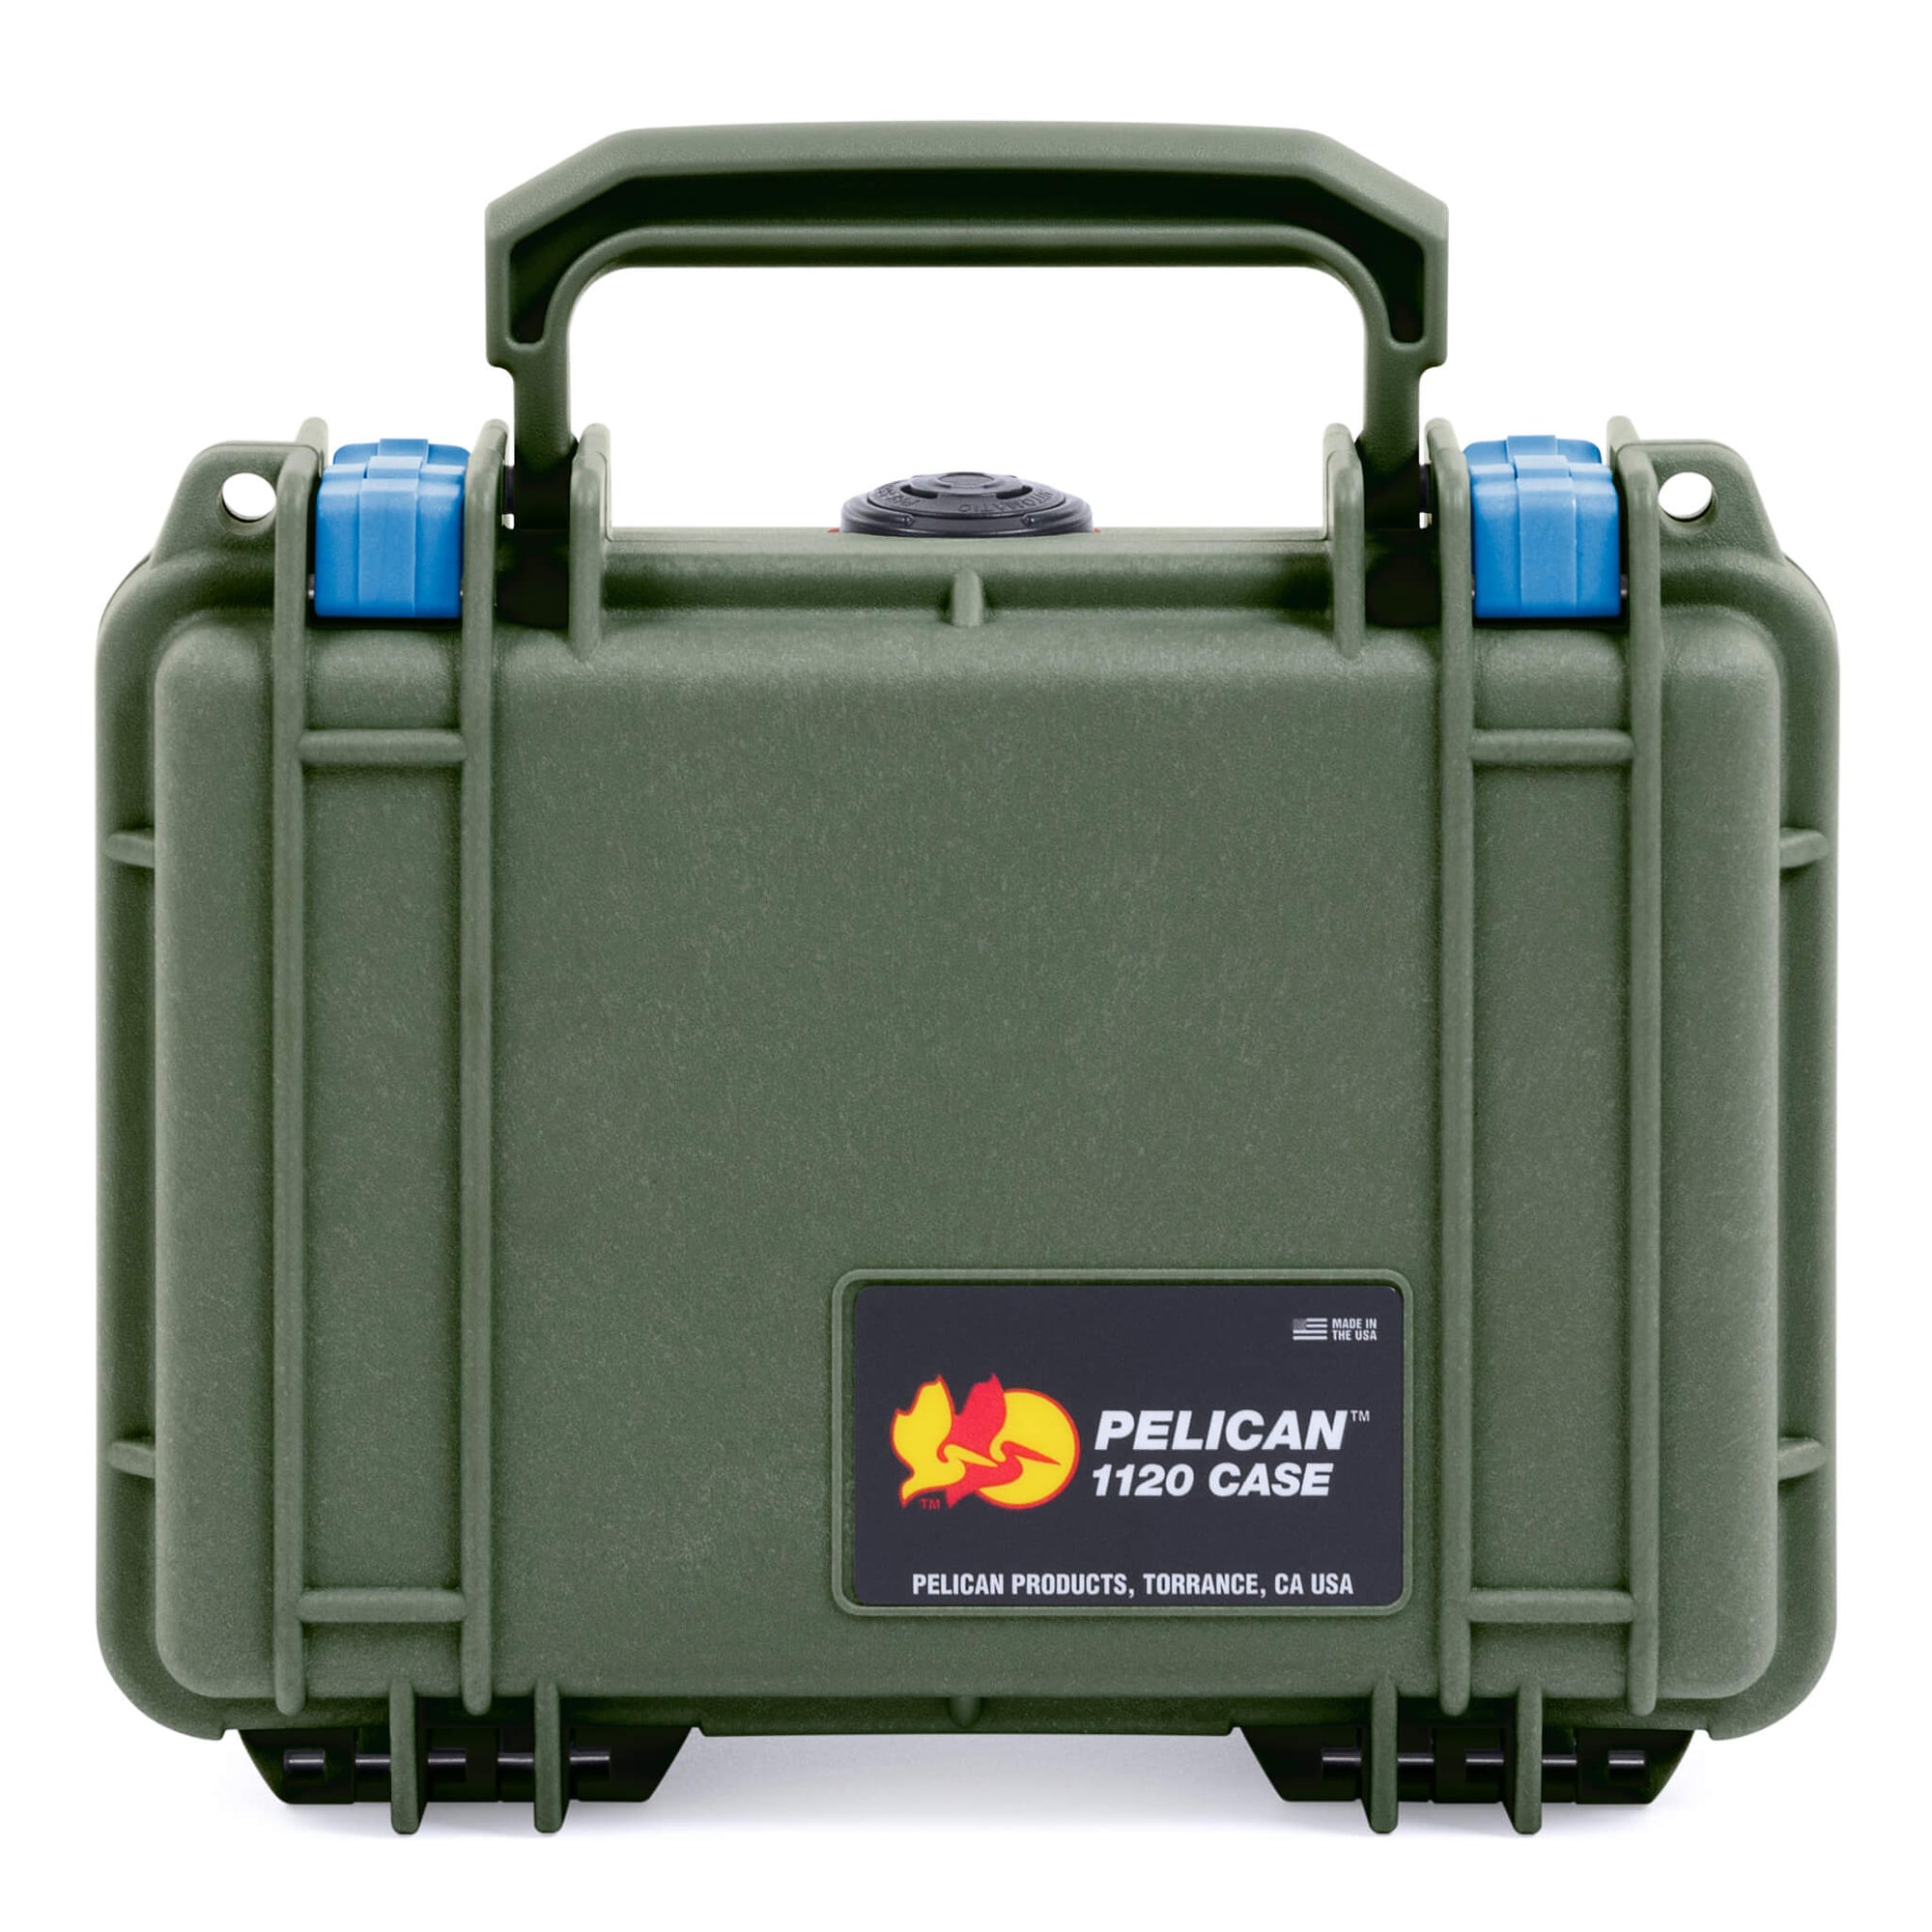 Pelican 1120 Case, OD Green with Blue Latches ColorCase 